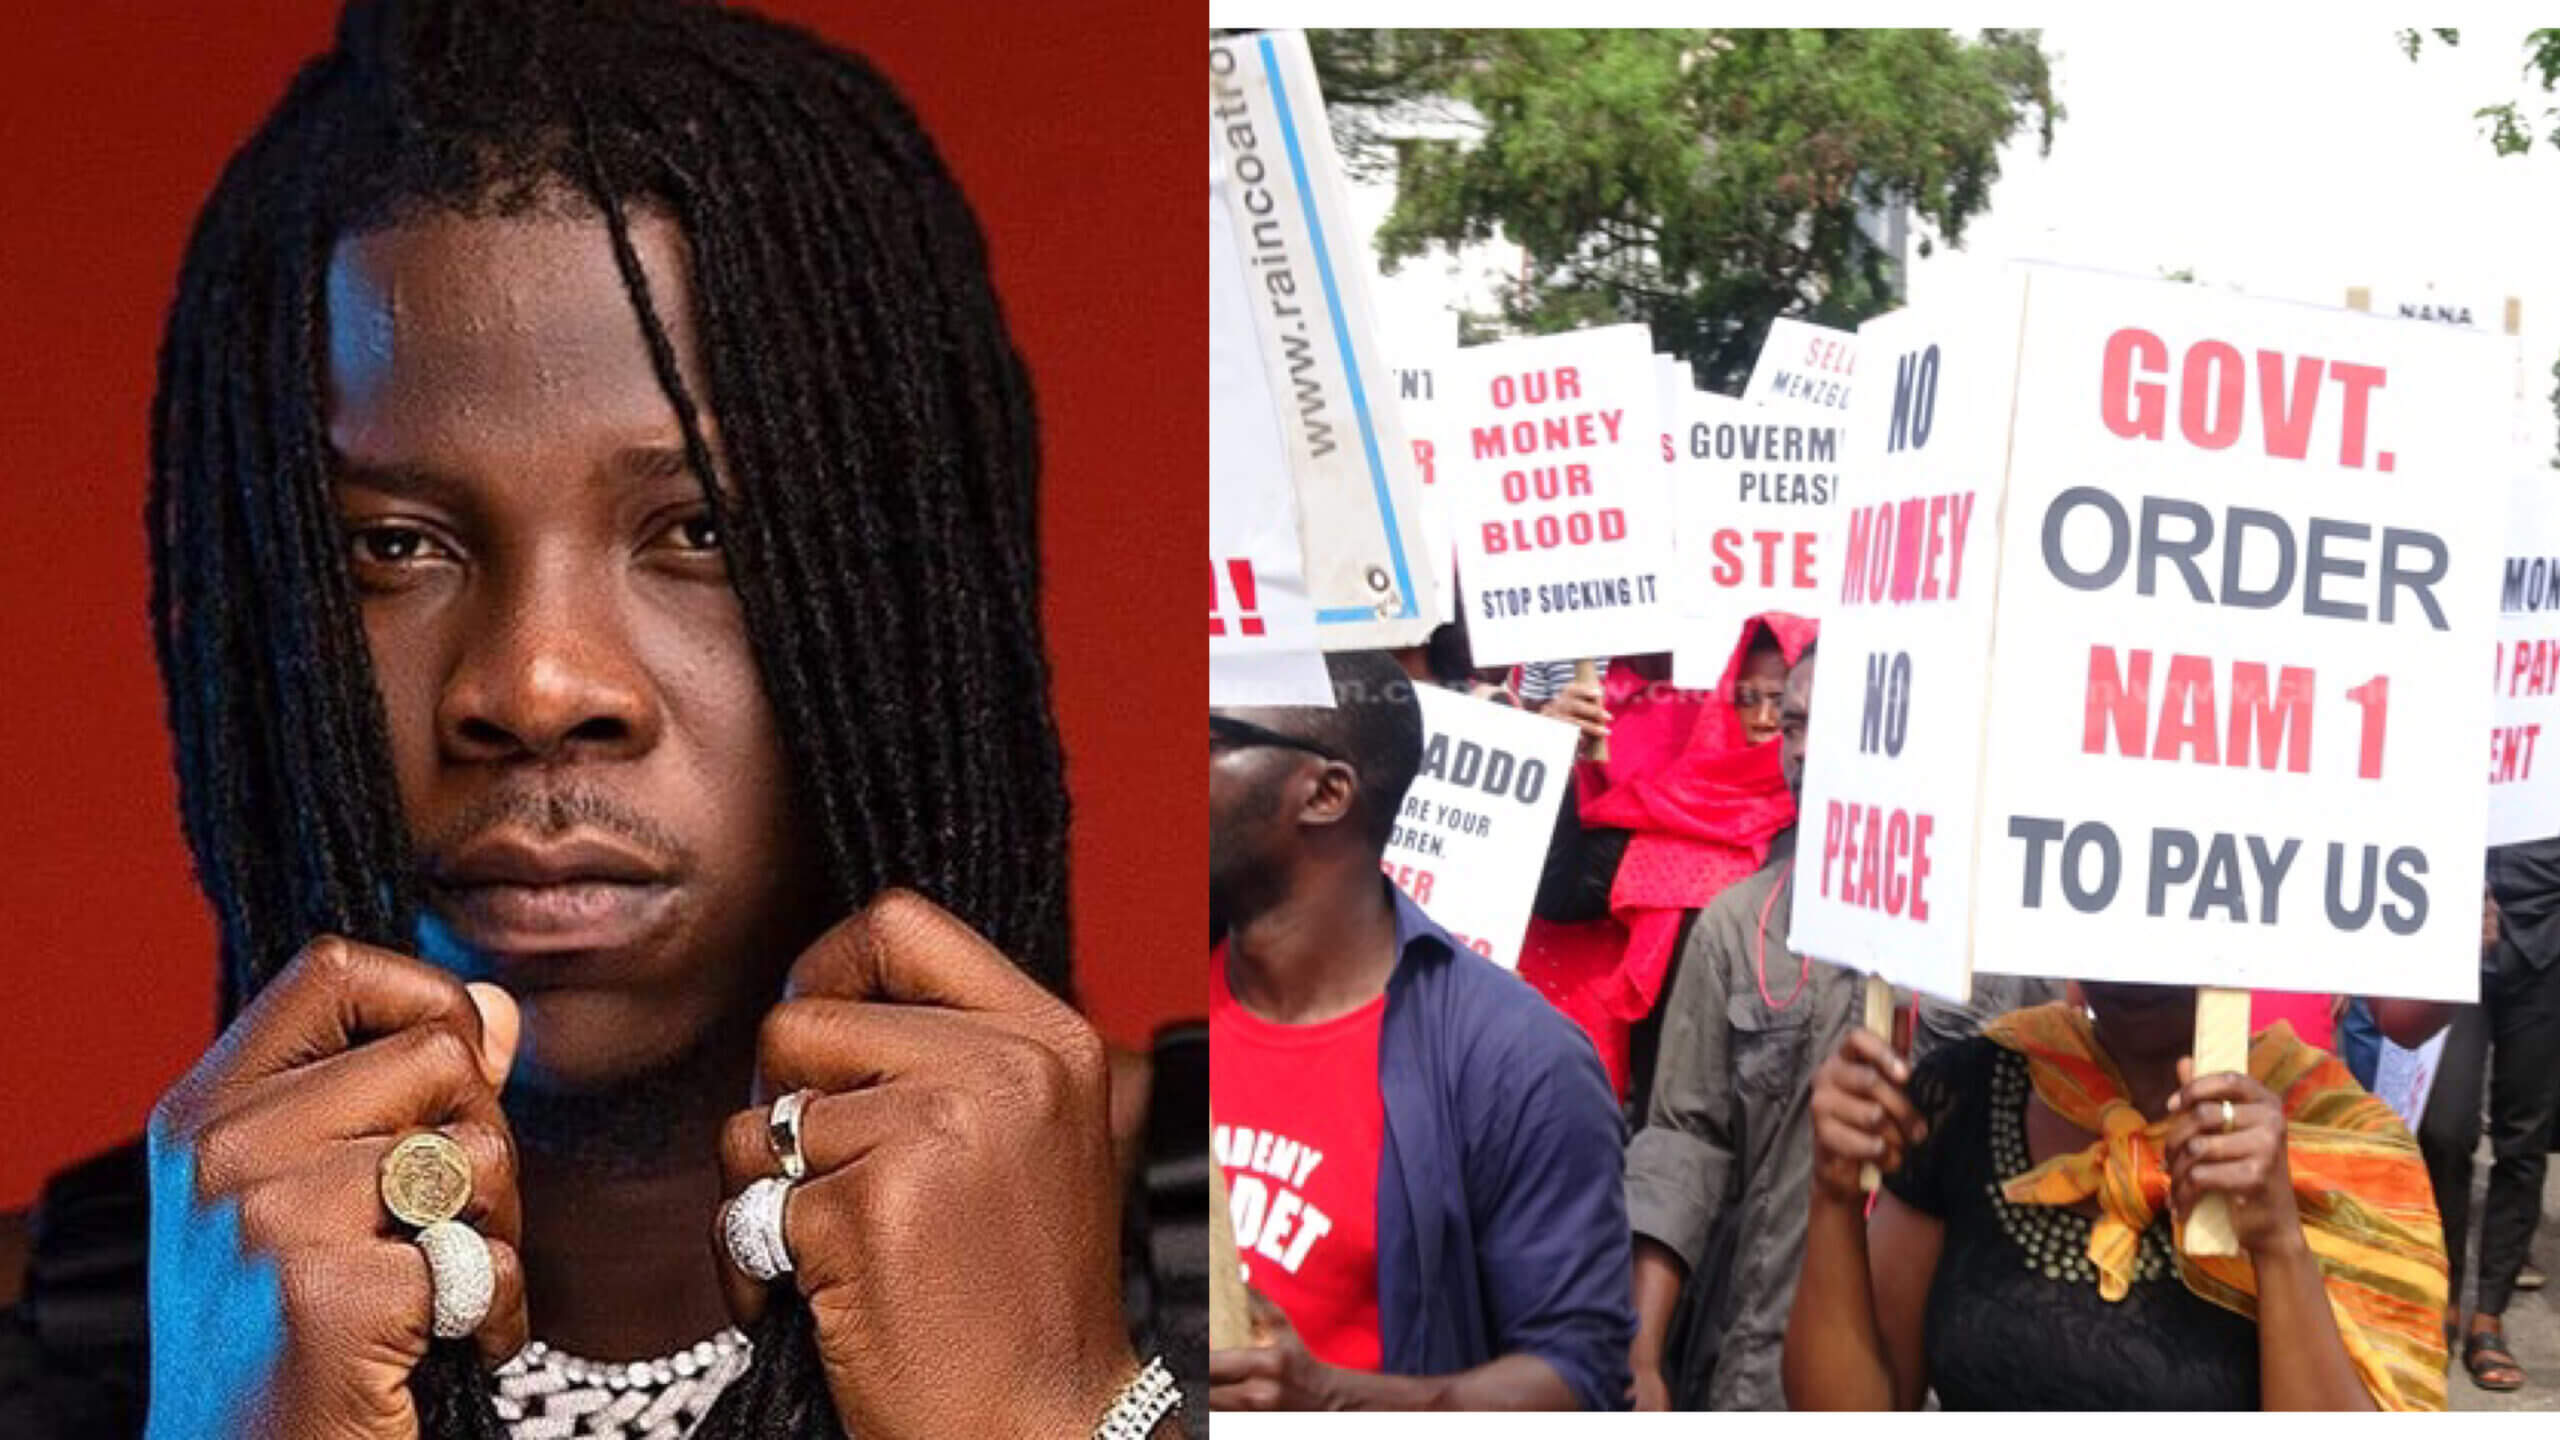 Menzgold Customers want EOCO and CID to arrest Stonebwoy for promoting SIDICOIN